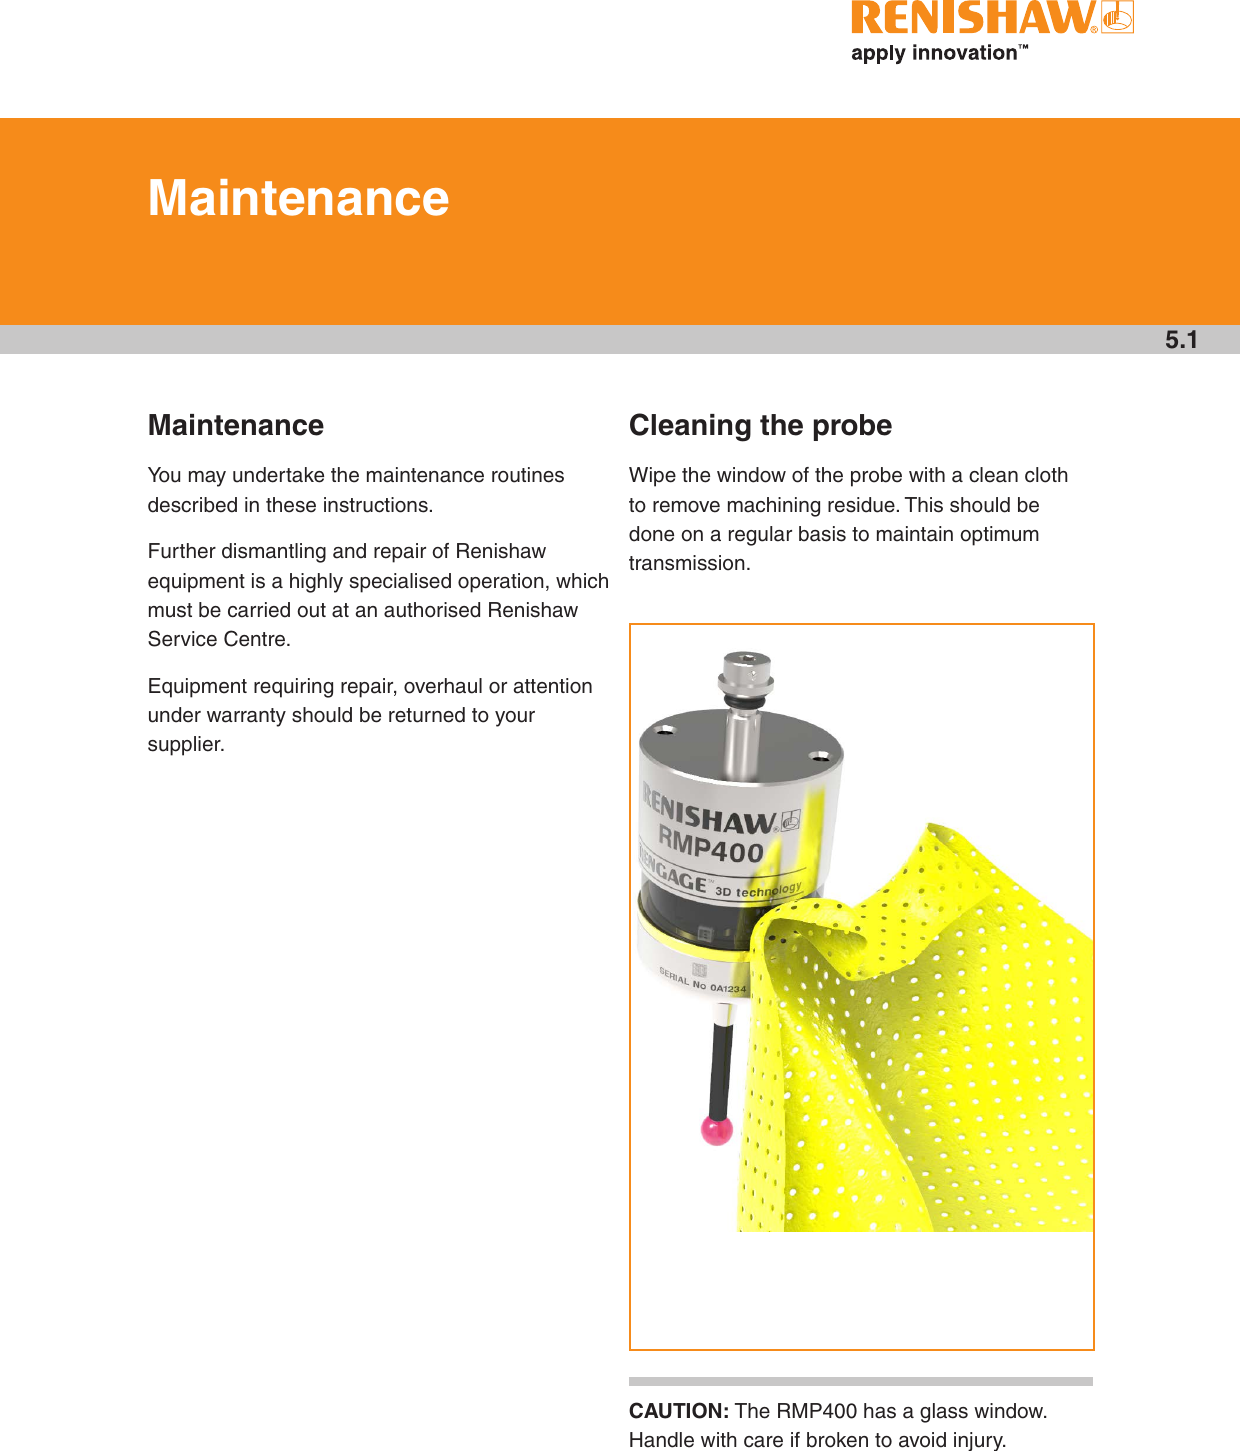 5.1MaintenanceYou may undertake the maintenance routines described in these instructions.Further dismantling and repair of Renishaw equipment is a highly specialised operation, which must be carried out at an authorised Renishaw Service Centre.Equipment requiring repair, overhaul or attention under warranty should be returned to your supplier.Cleaning the probeWipe the window of the probe with a clean cloth to remove machining residue. This should be done on a regular basis to maintain optimum transmission.MaintenanceCAUTION: The RMP400 has a glass window. Handle with care if broken to avoid injury.see Section 5,“Maintenance”Draft 5 16/04/18